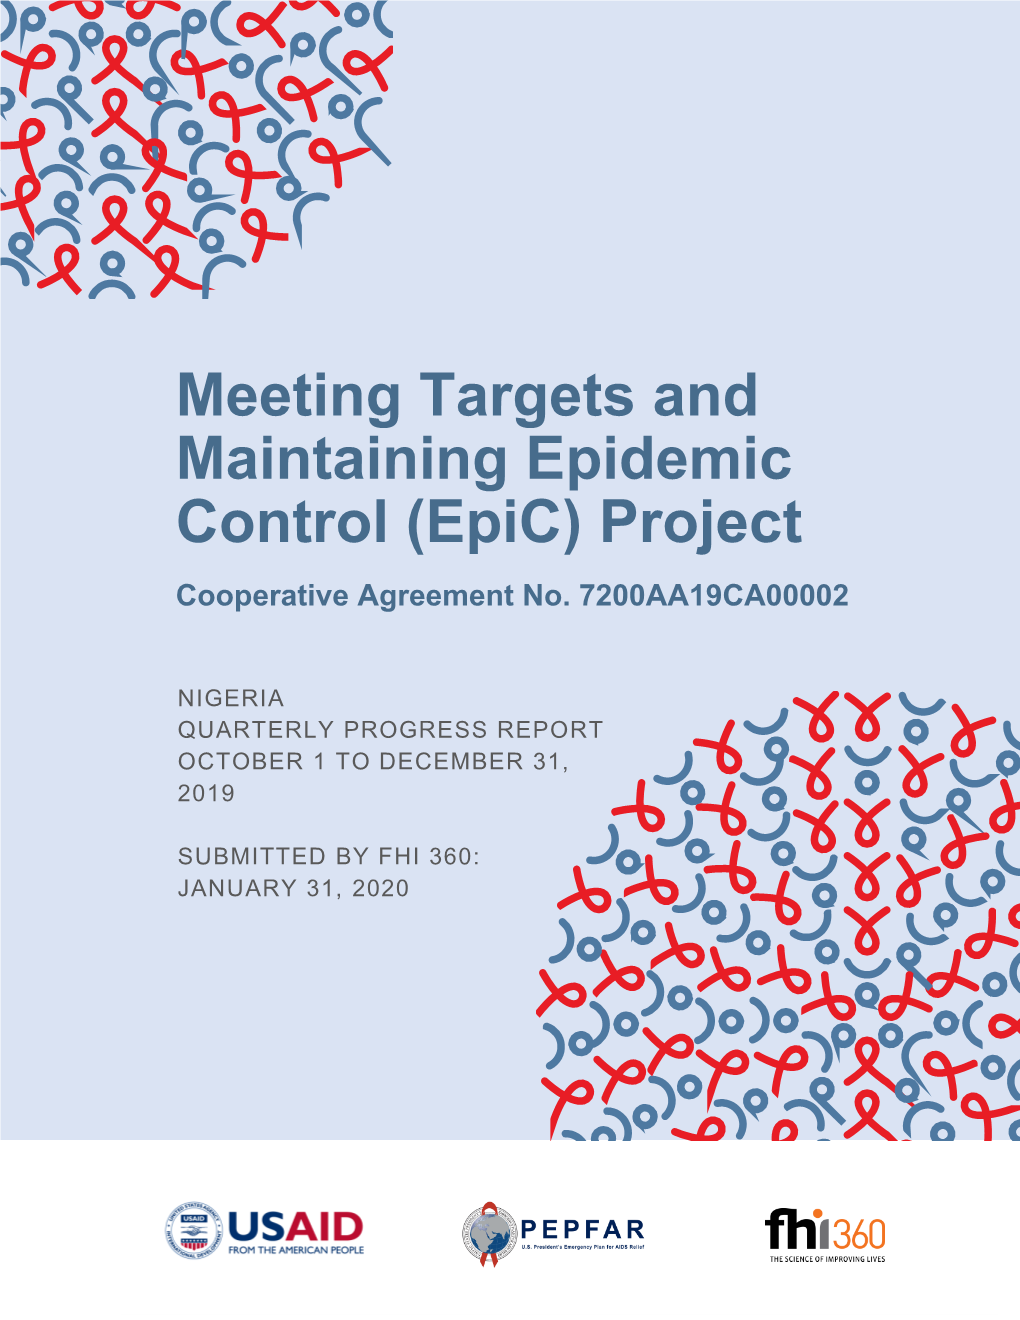 Epic) Project Cooperative Agreement No